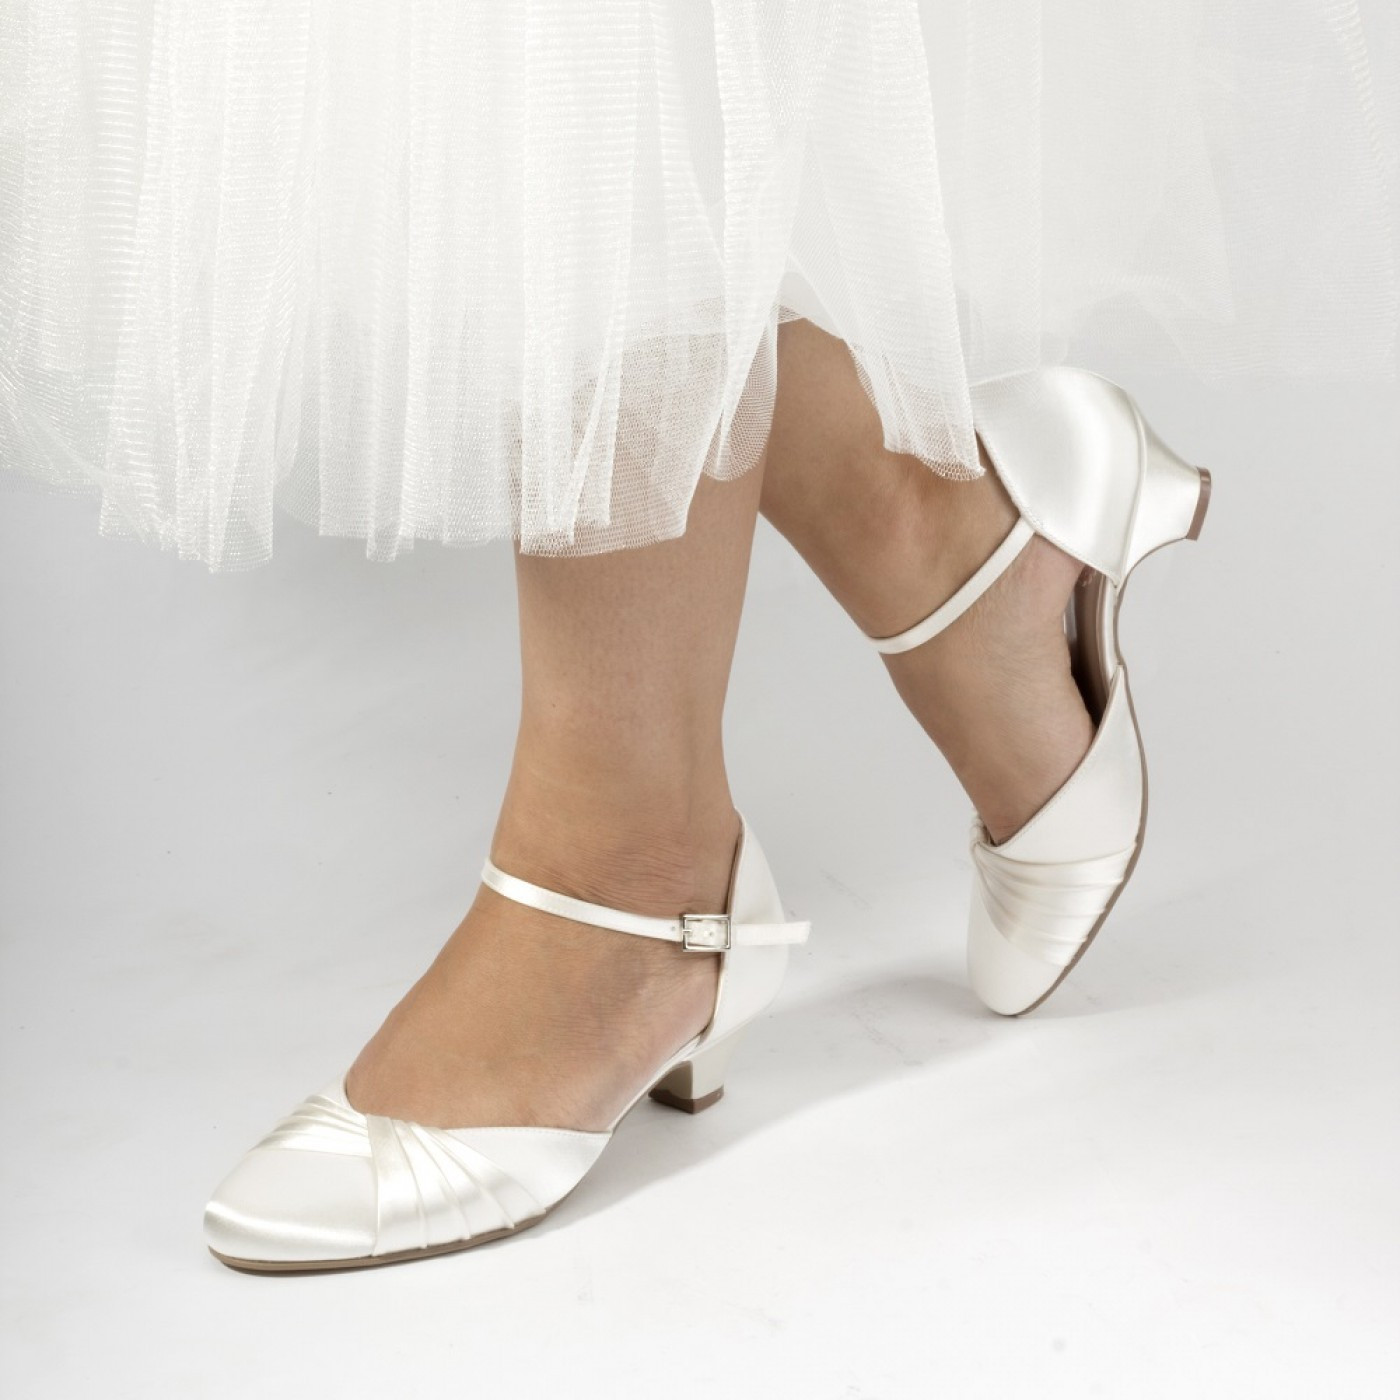 Wedding Shoes Low Heel
 Pink Paradox Protea Dyeable Ivory Satin Low Heel Wedding